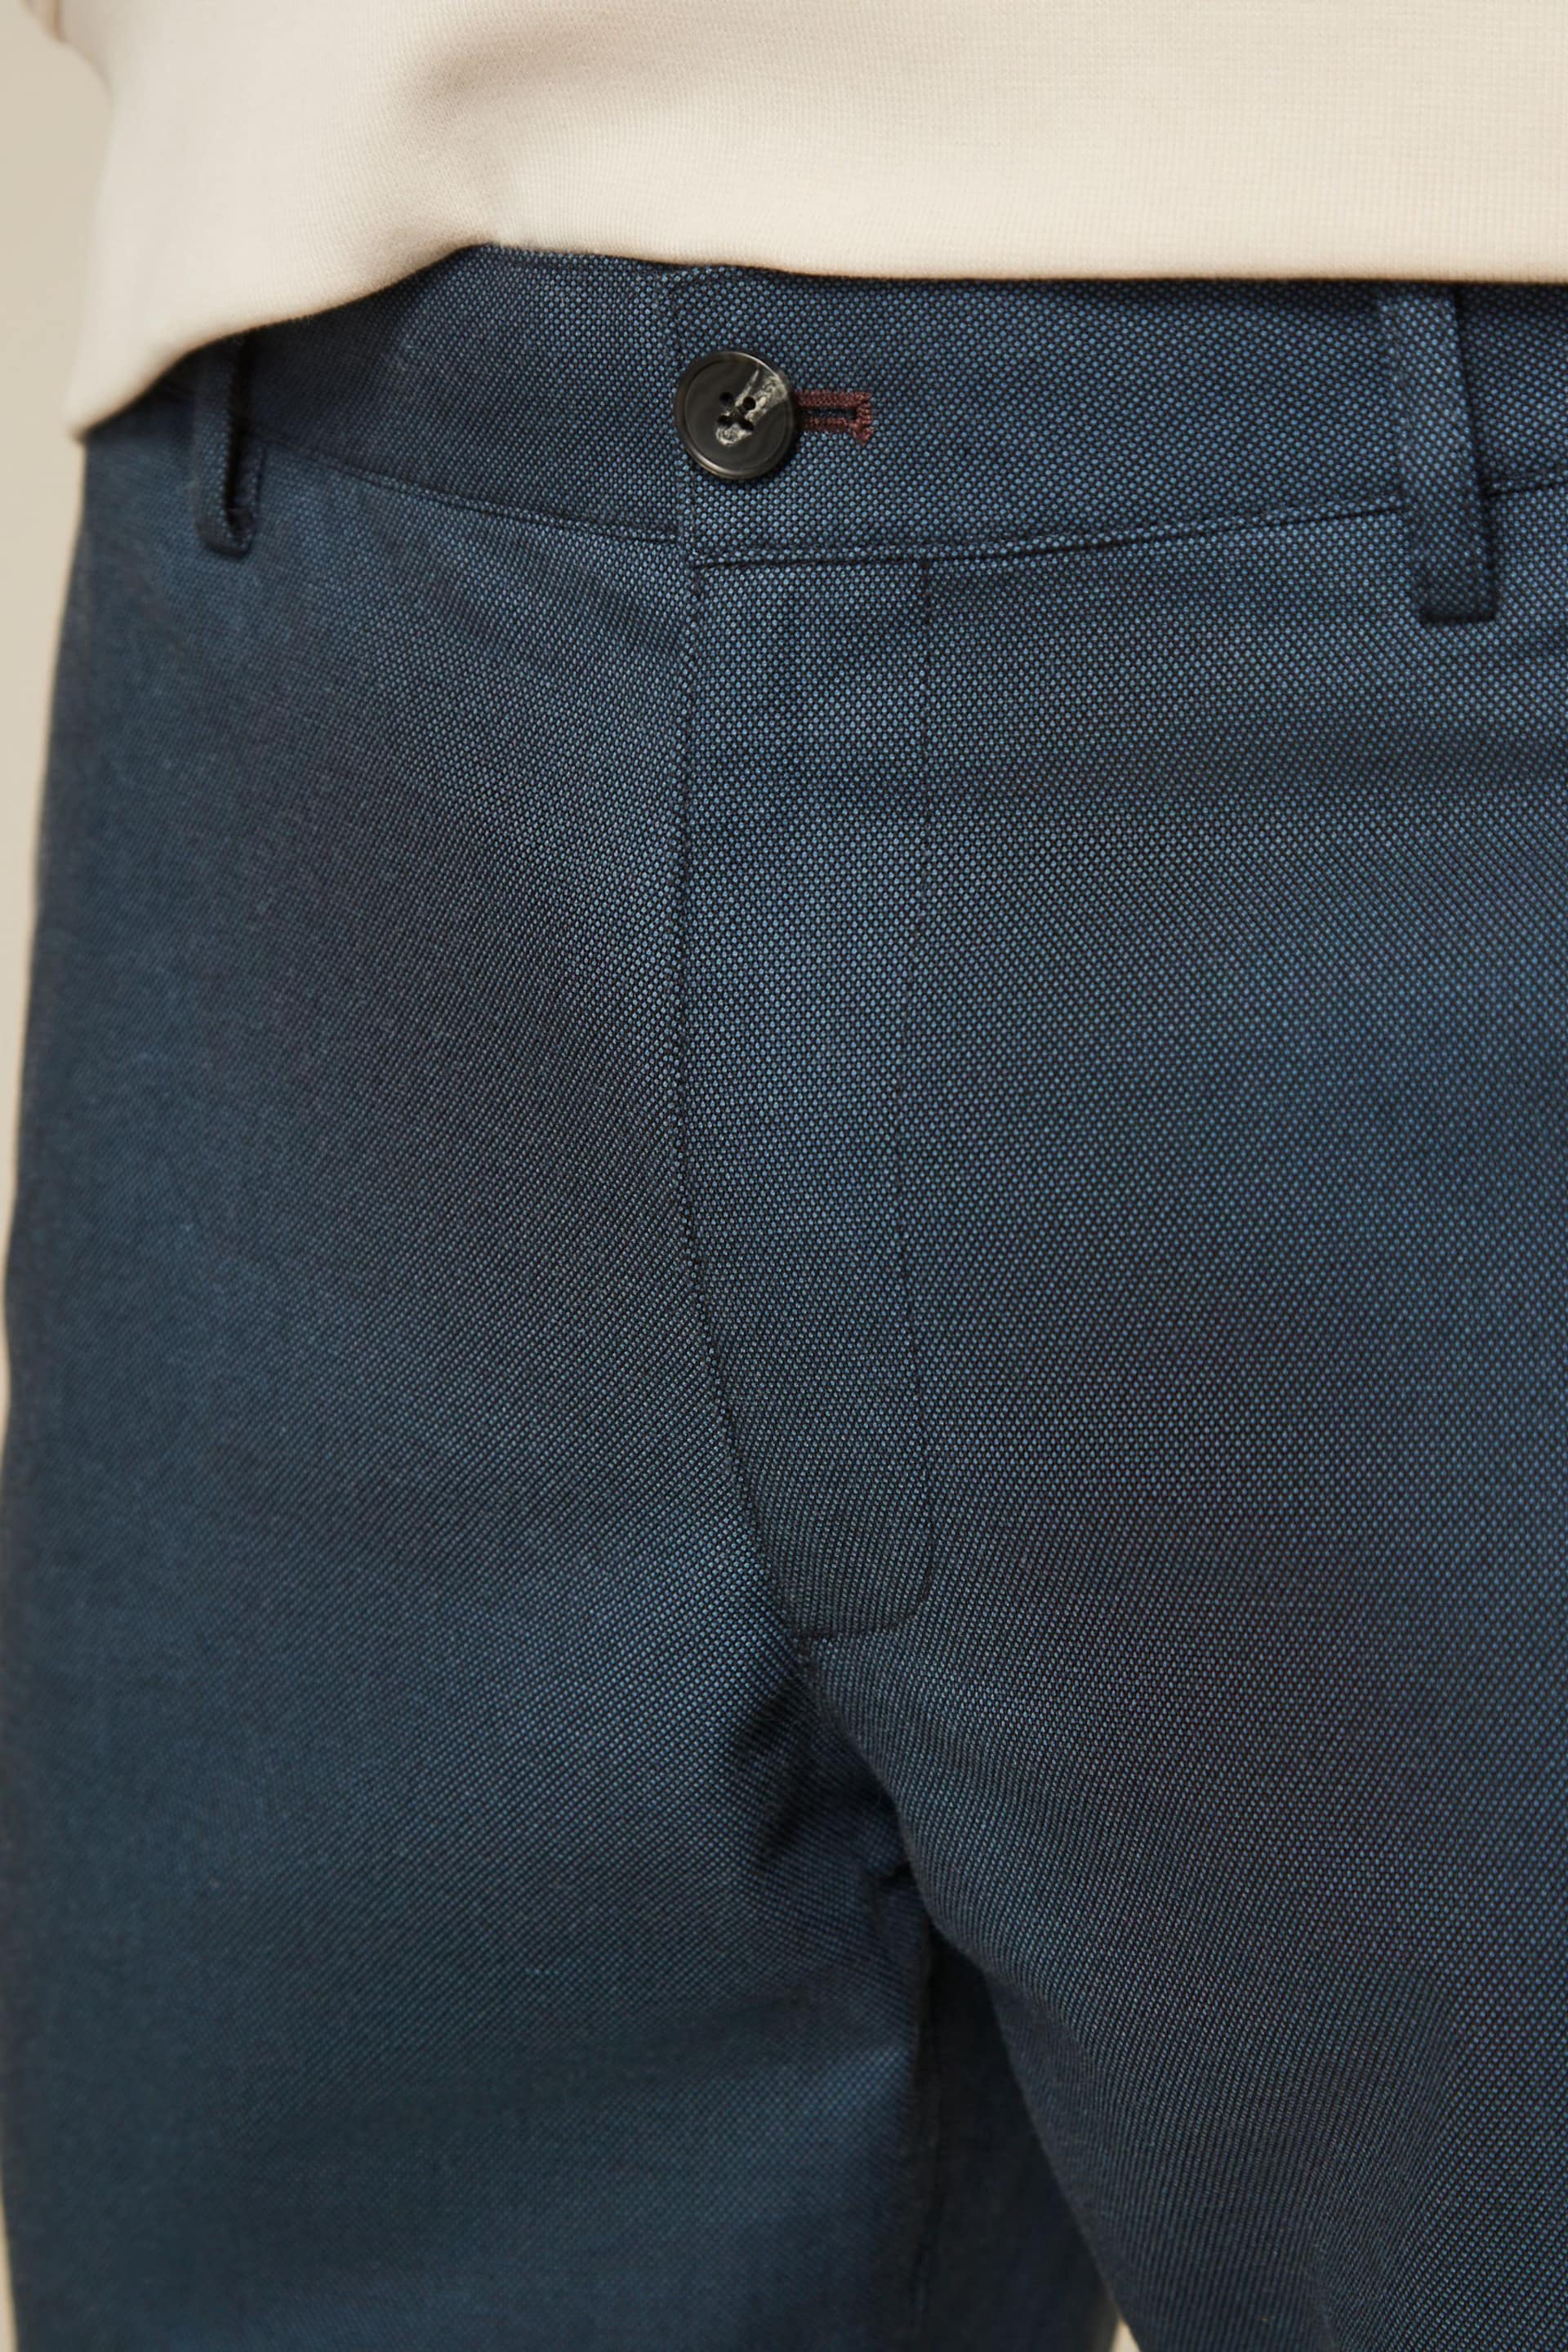 Blue 5 Pocket Smart Textured Chino Trousers - Image 4 of 8